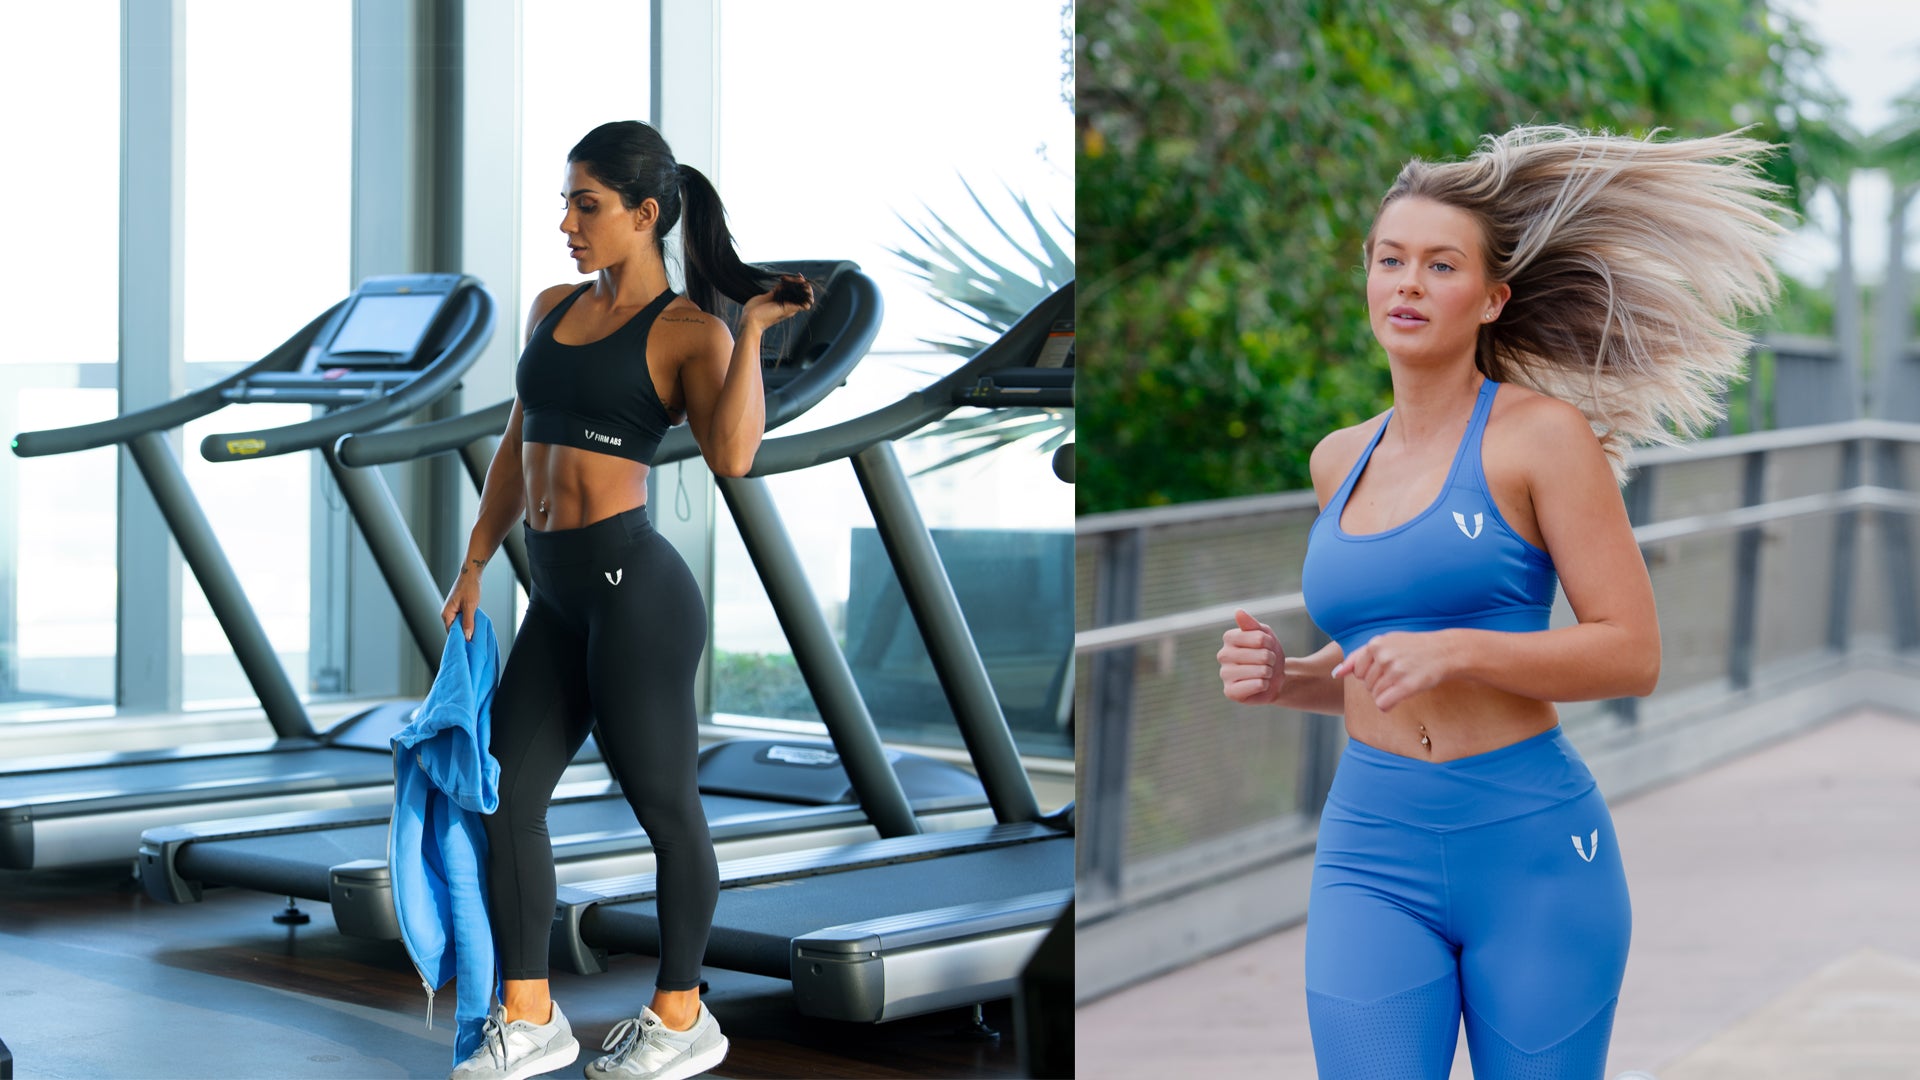 Treadmill vs outside running: which is better?